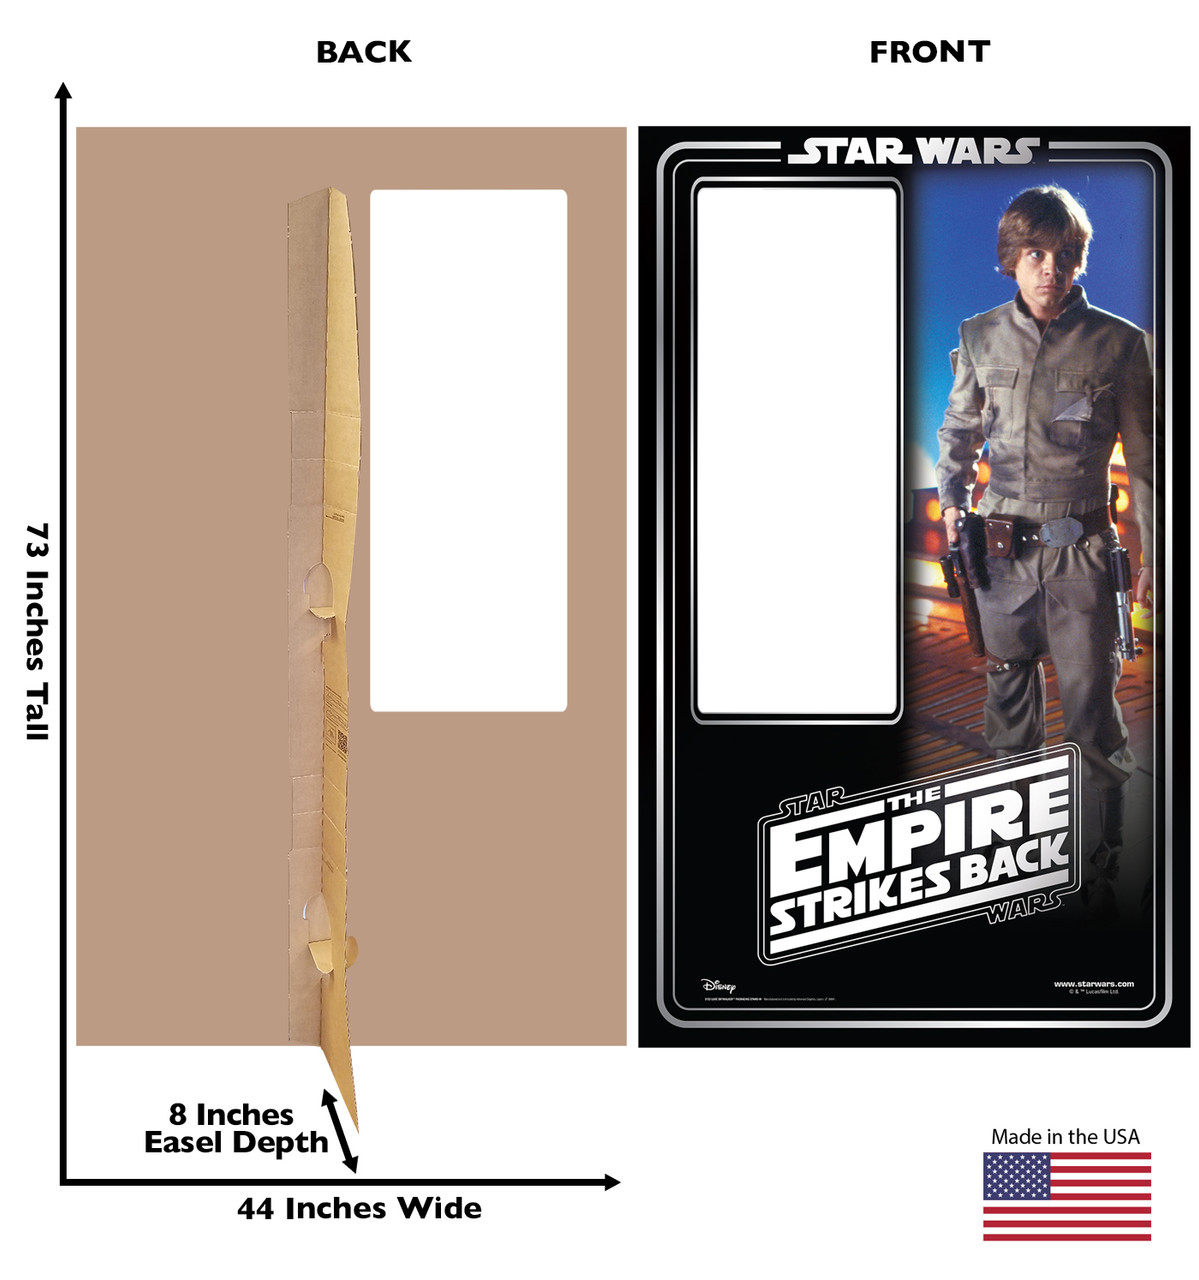 Life-size cardboard standin of Luke Skywalker Packaging. Celebrating 40 years, with front and back dimensions.